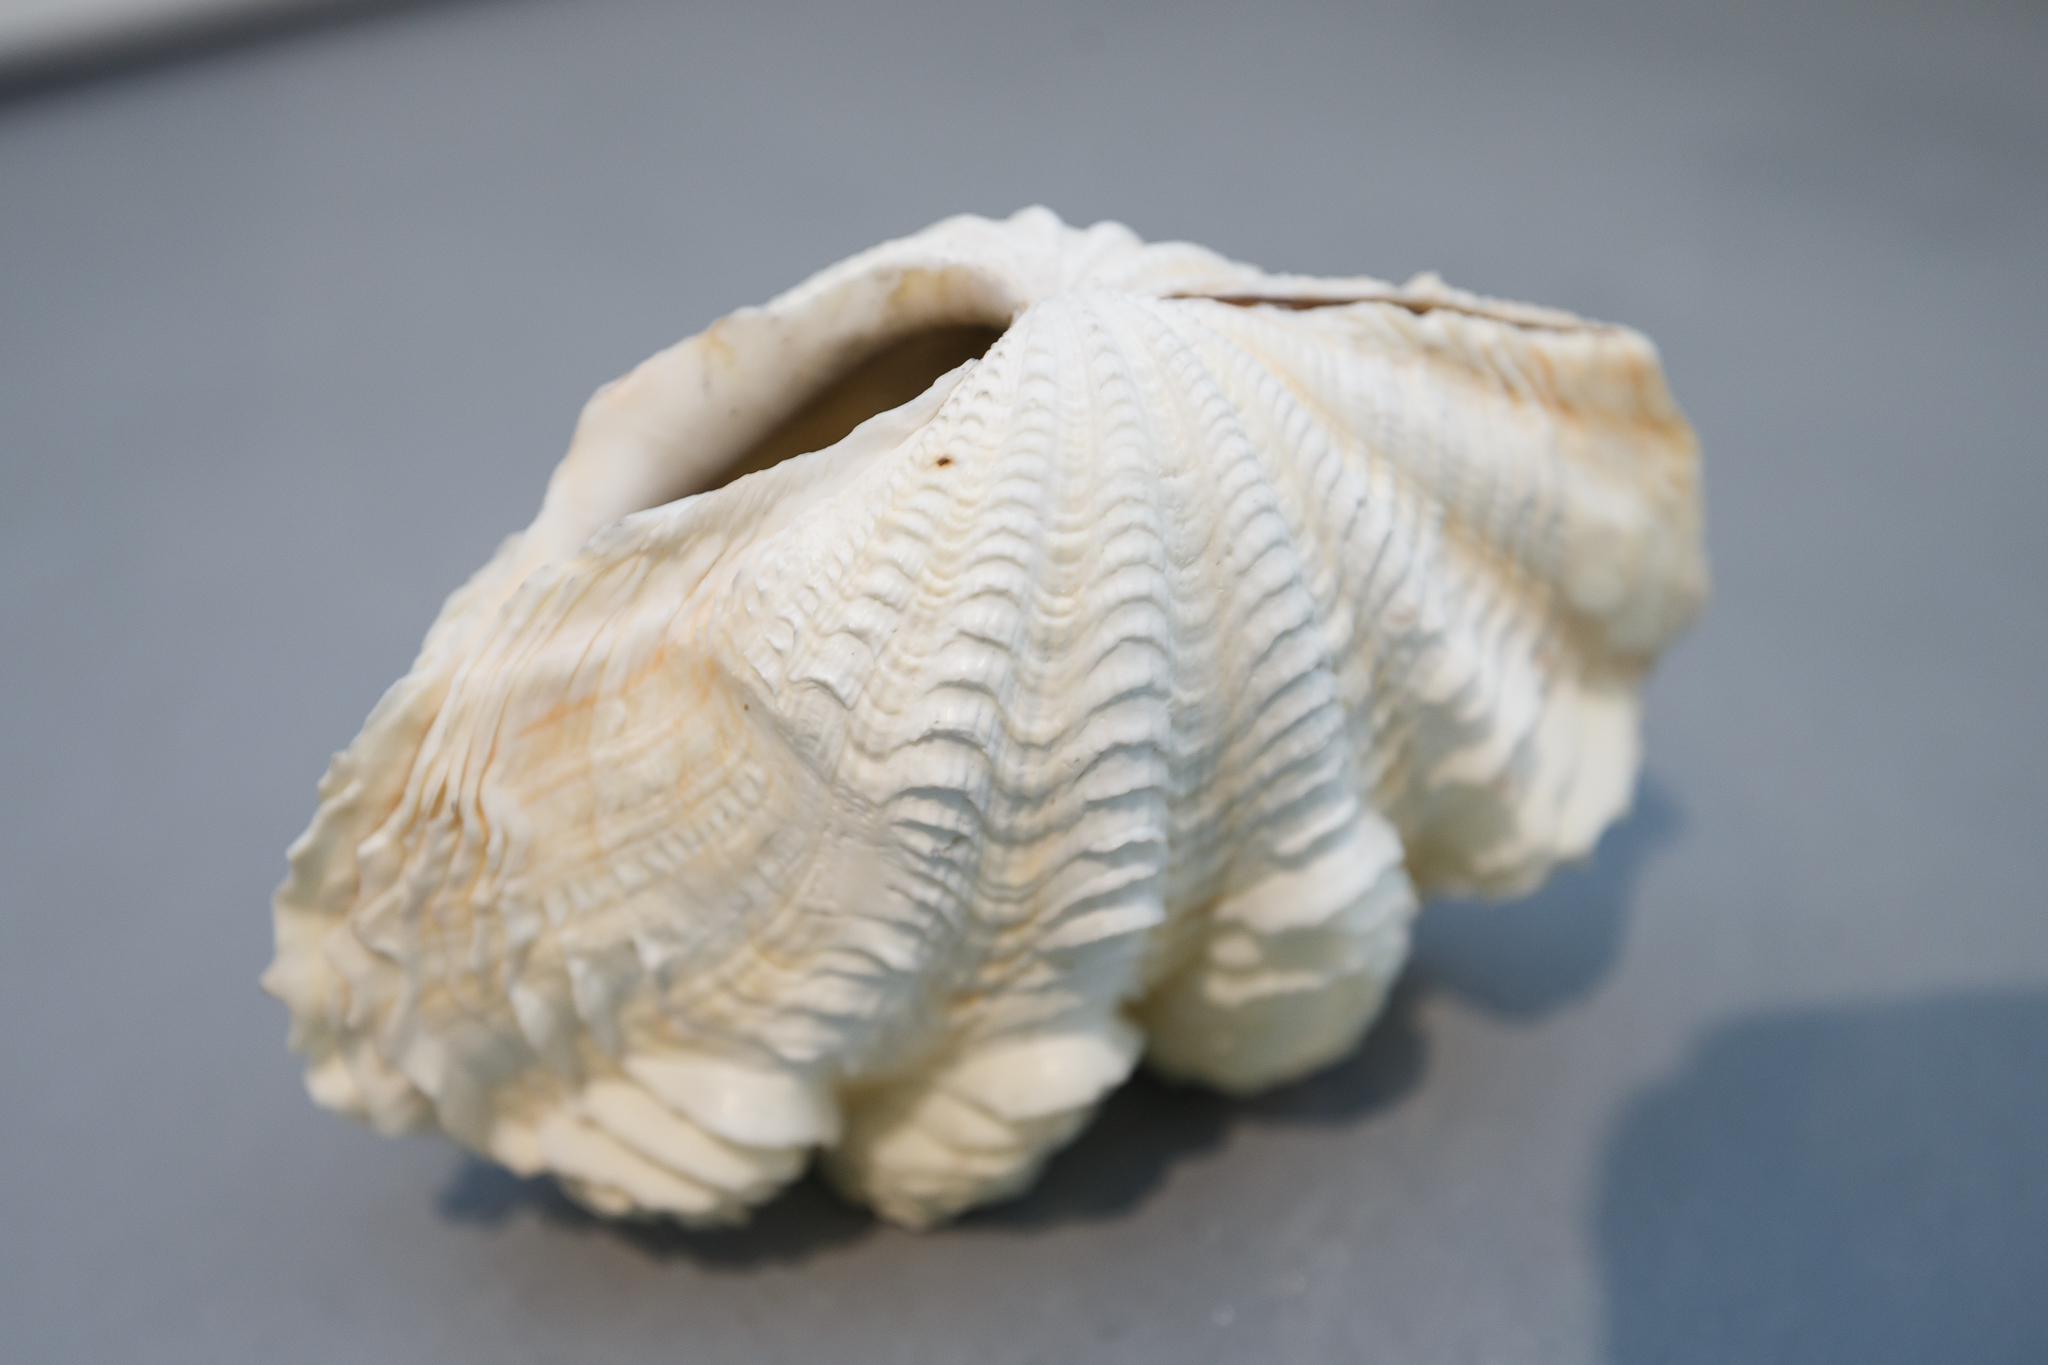 Daniel Chong, Lonely spaces, 2018, Seashell and ash, 9 x 20 x 13 cm